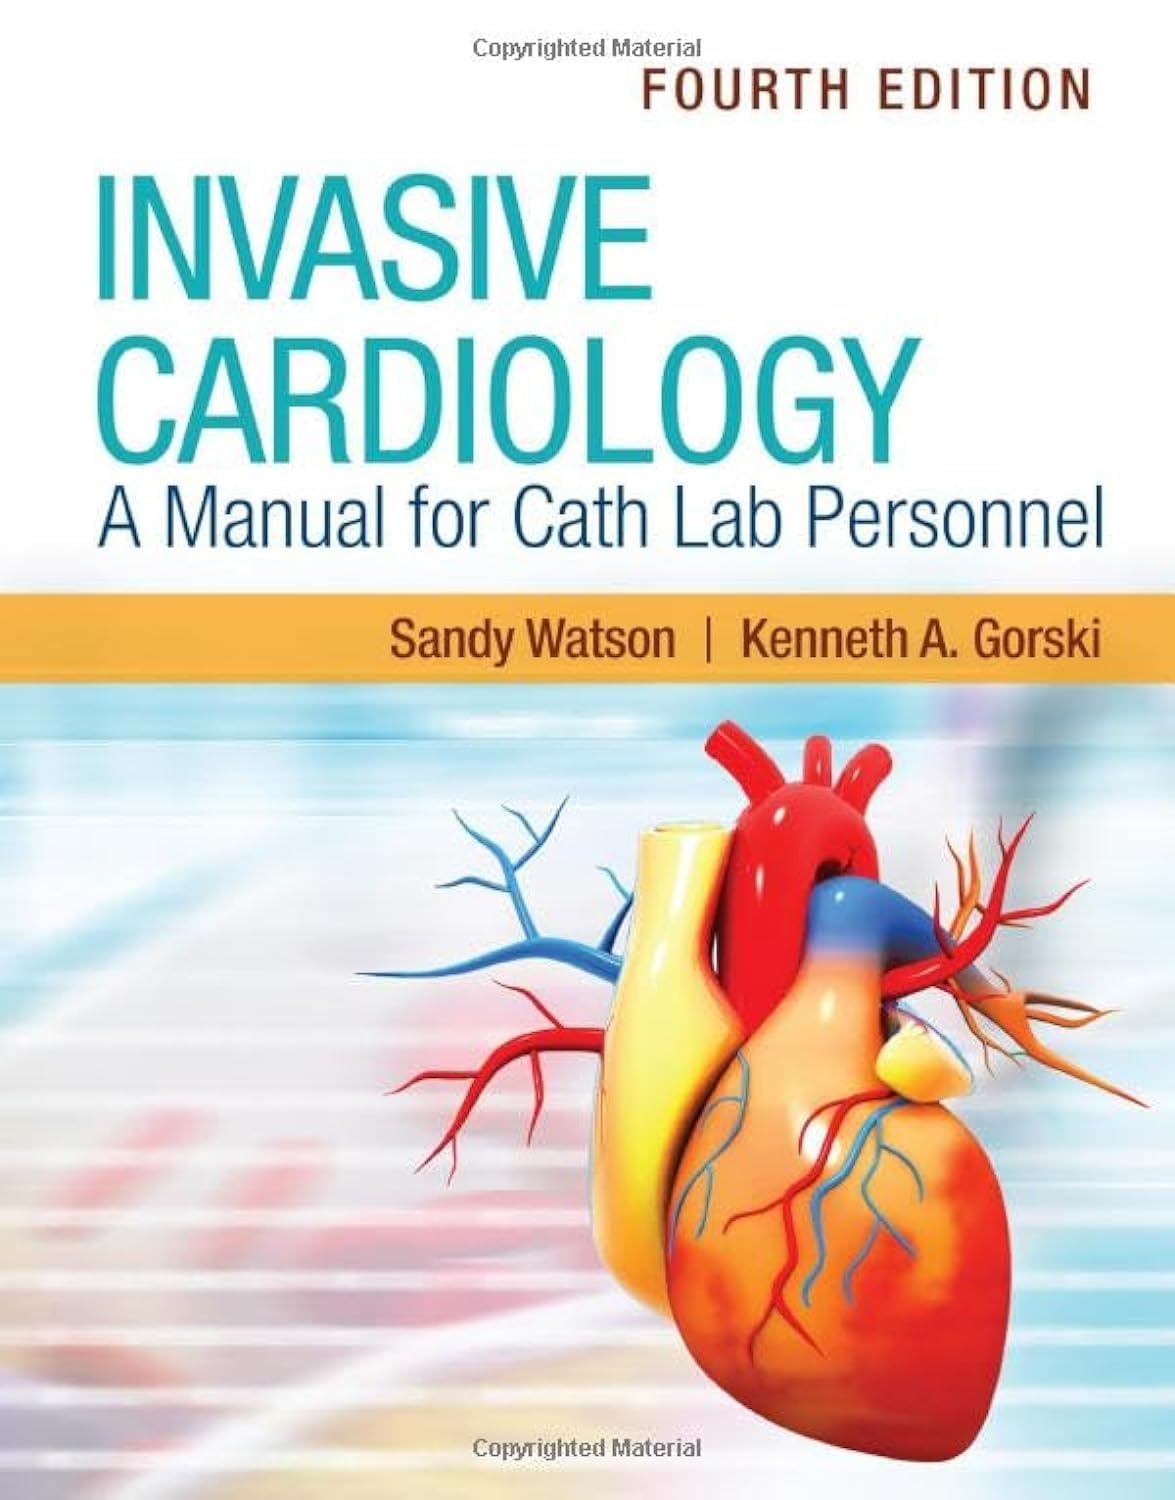 Invasive Cardiology: A Manual for Cath Lab Personnel, 4th Edition  by Sandy Watson 